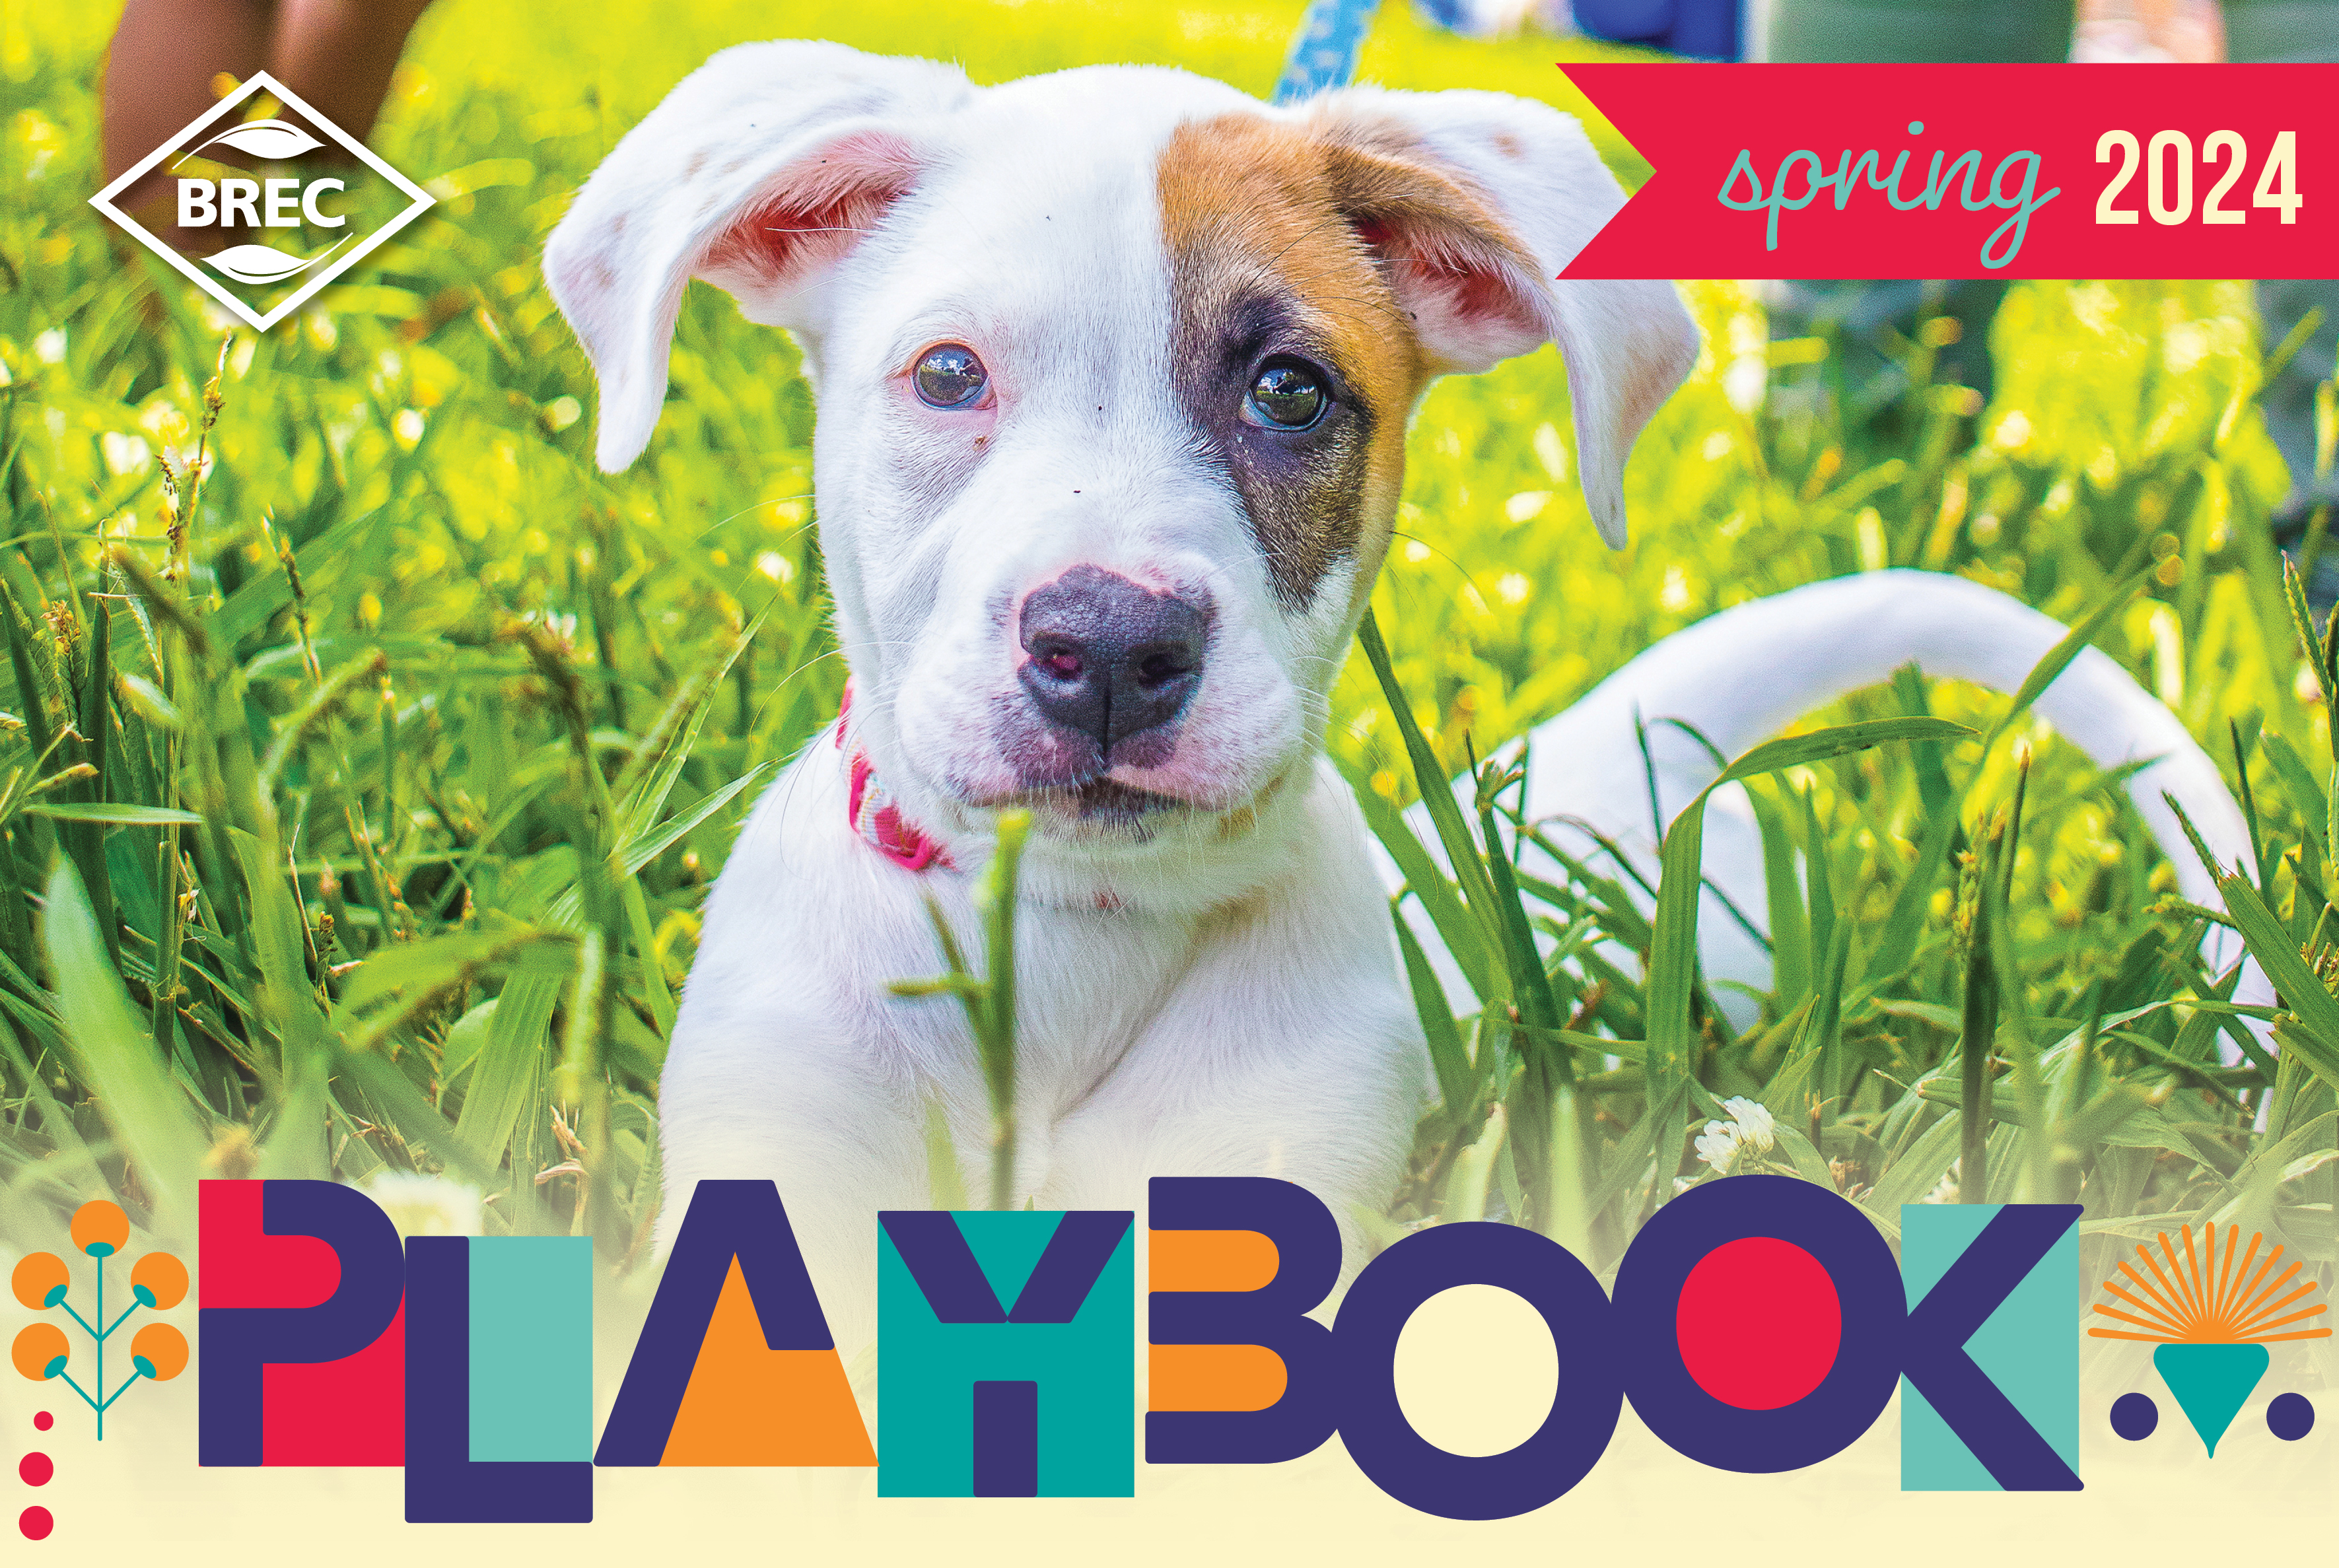 Puppy sitting in grass with graphics labeling it Spring 2024 Playboo